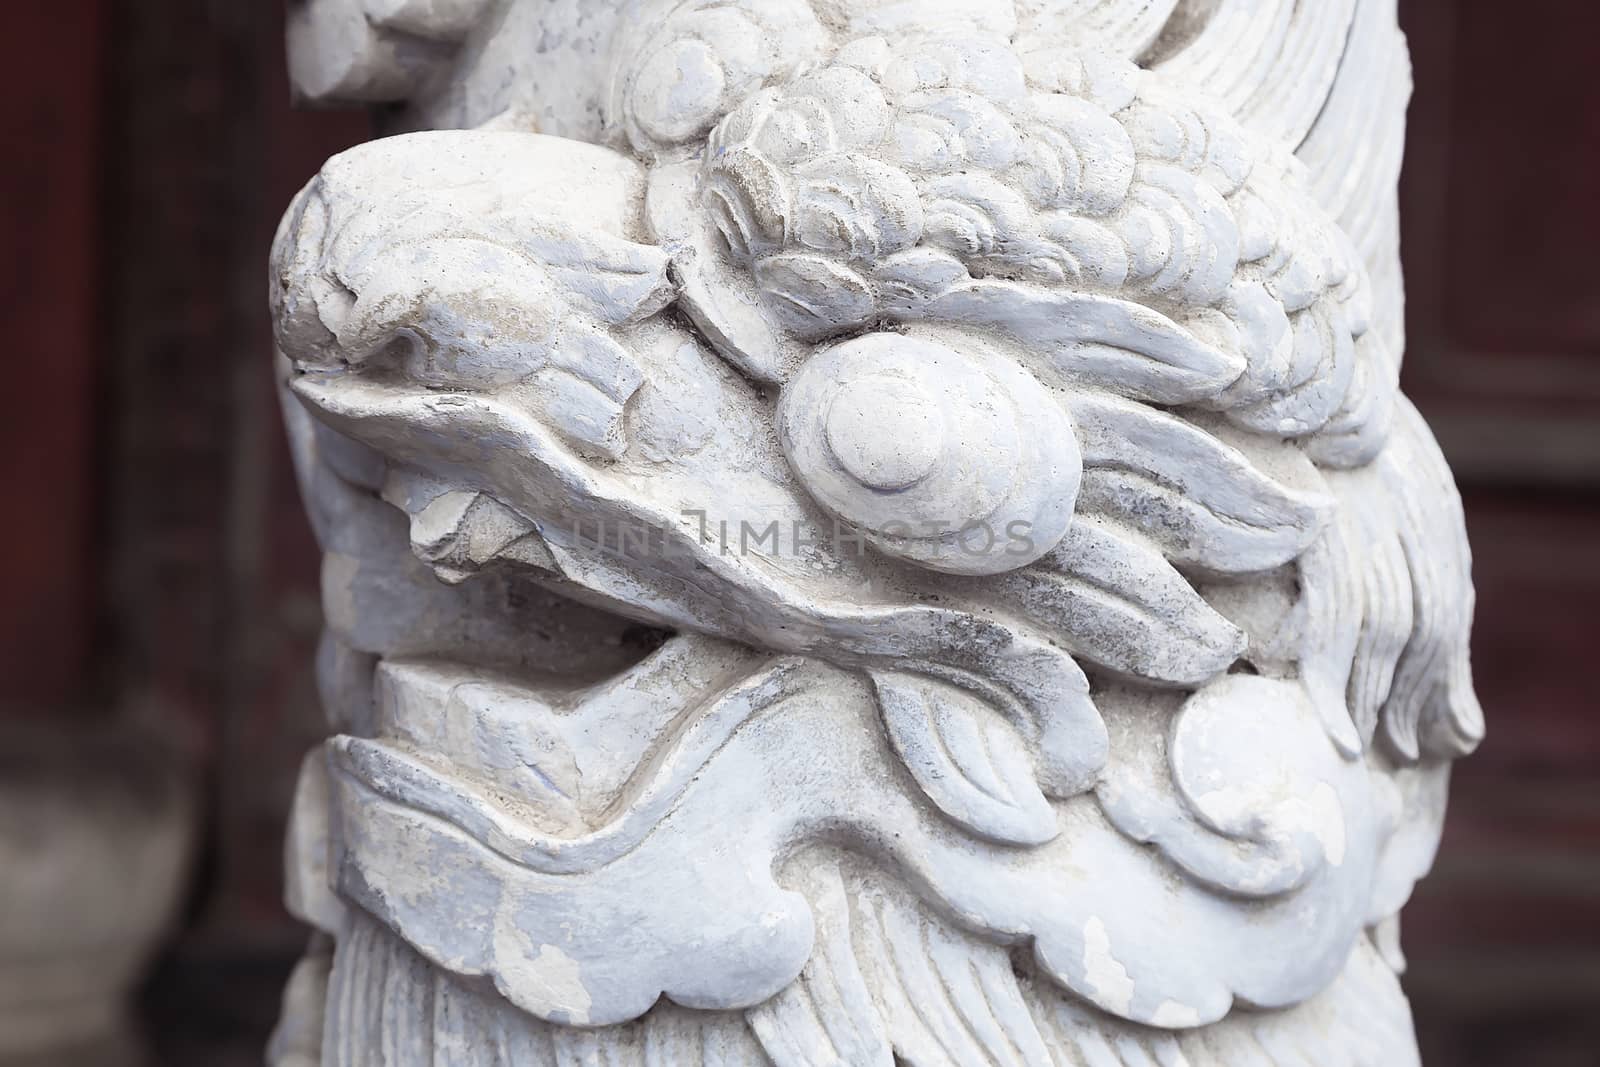 Dragon sculpture in Imperial Palace in Hue, Vietnam